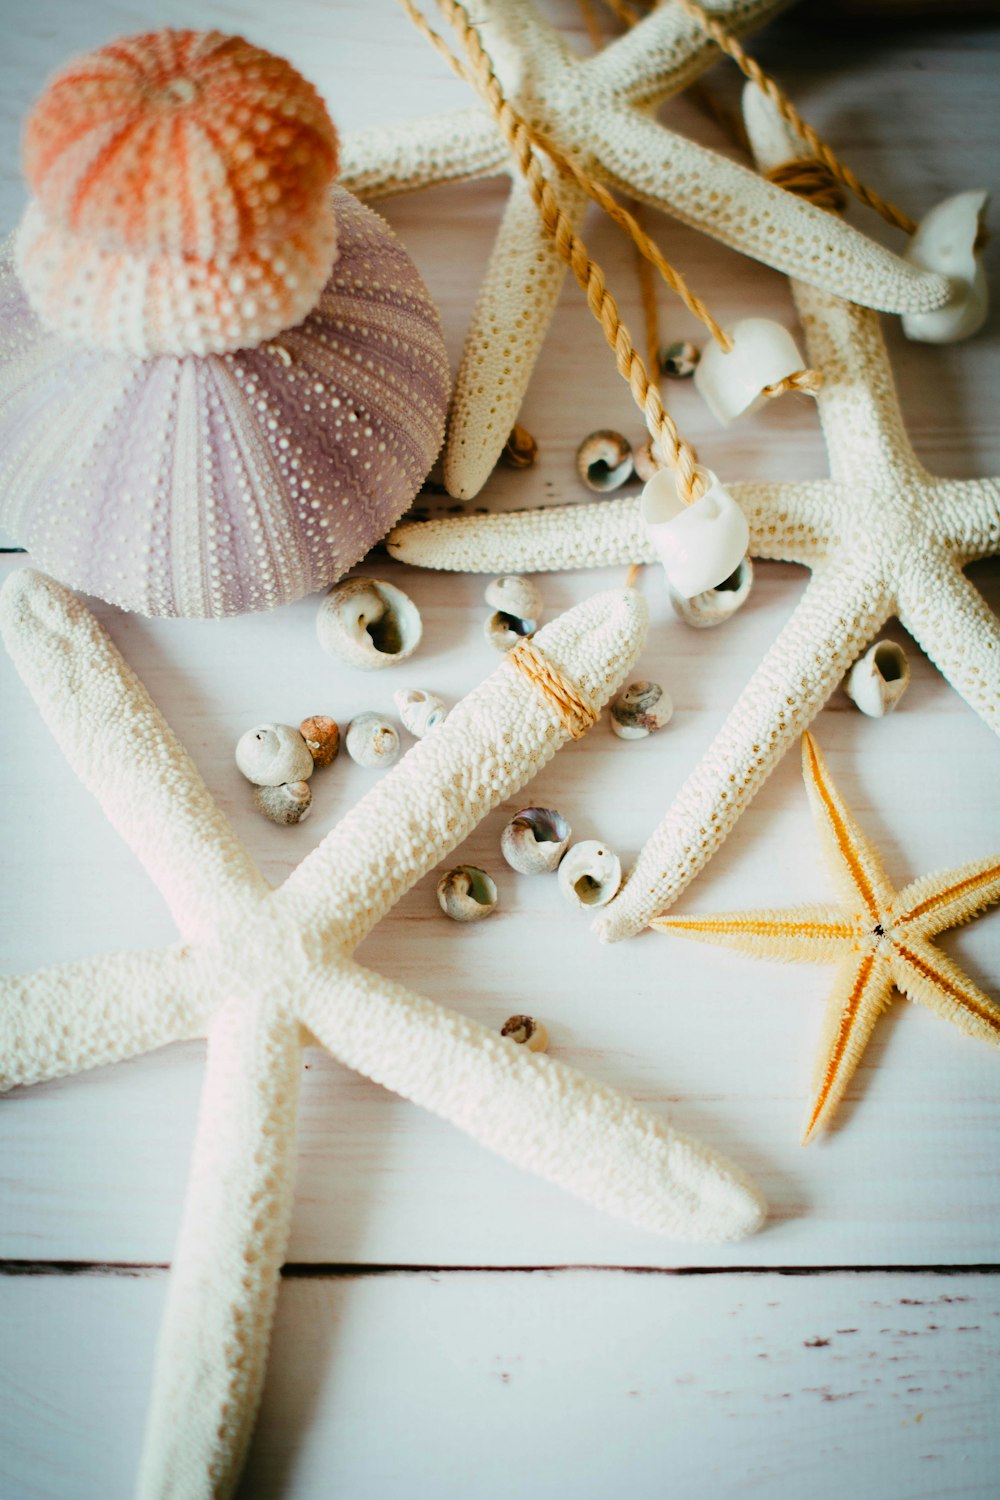 starfish, shells, and seashells on a white wooden surface